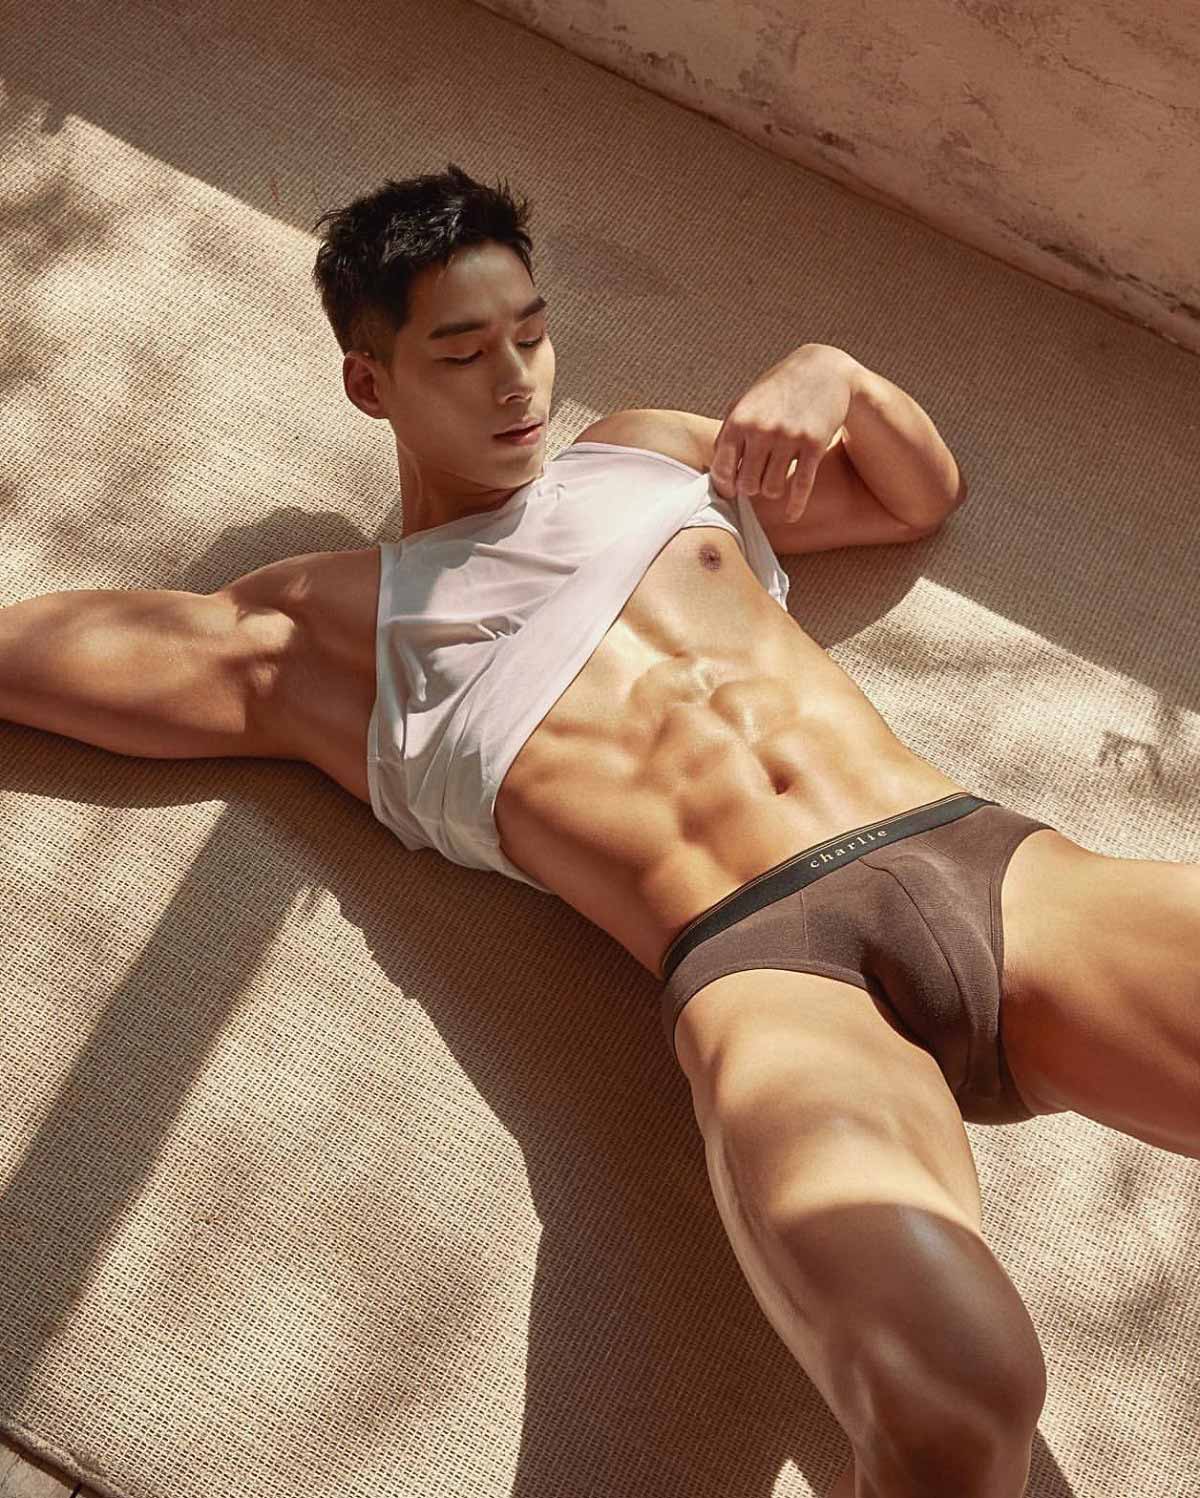 This hot young Korean guy was Mister Global Korea 2018.